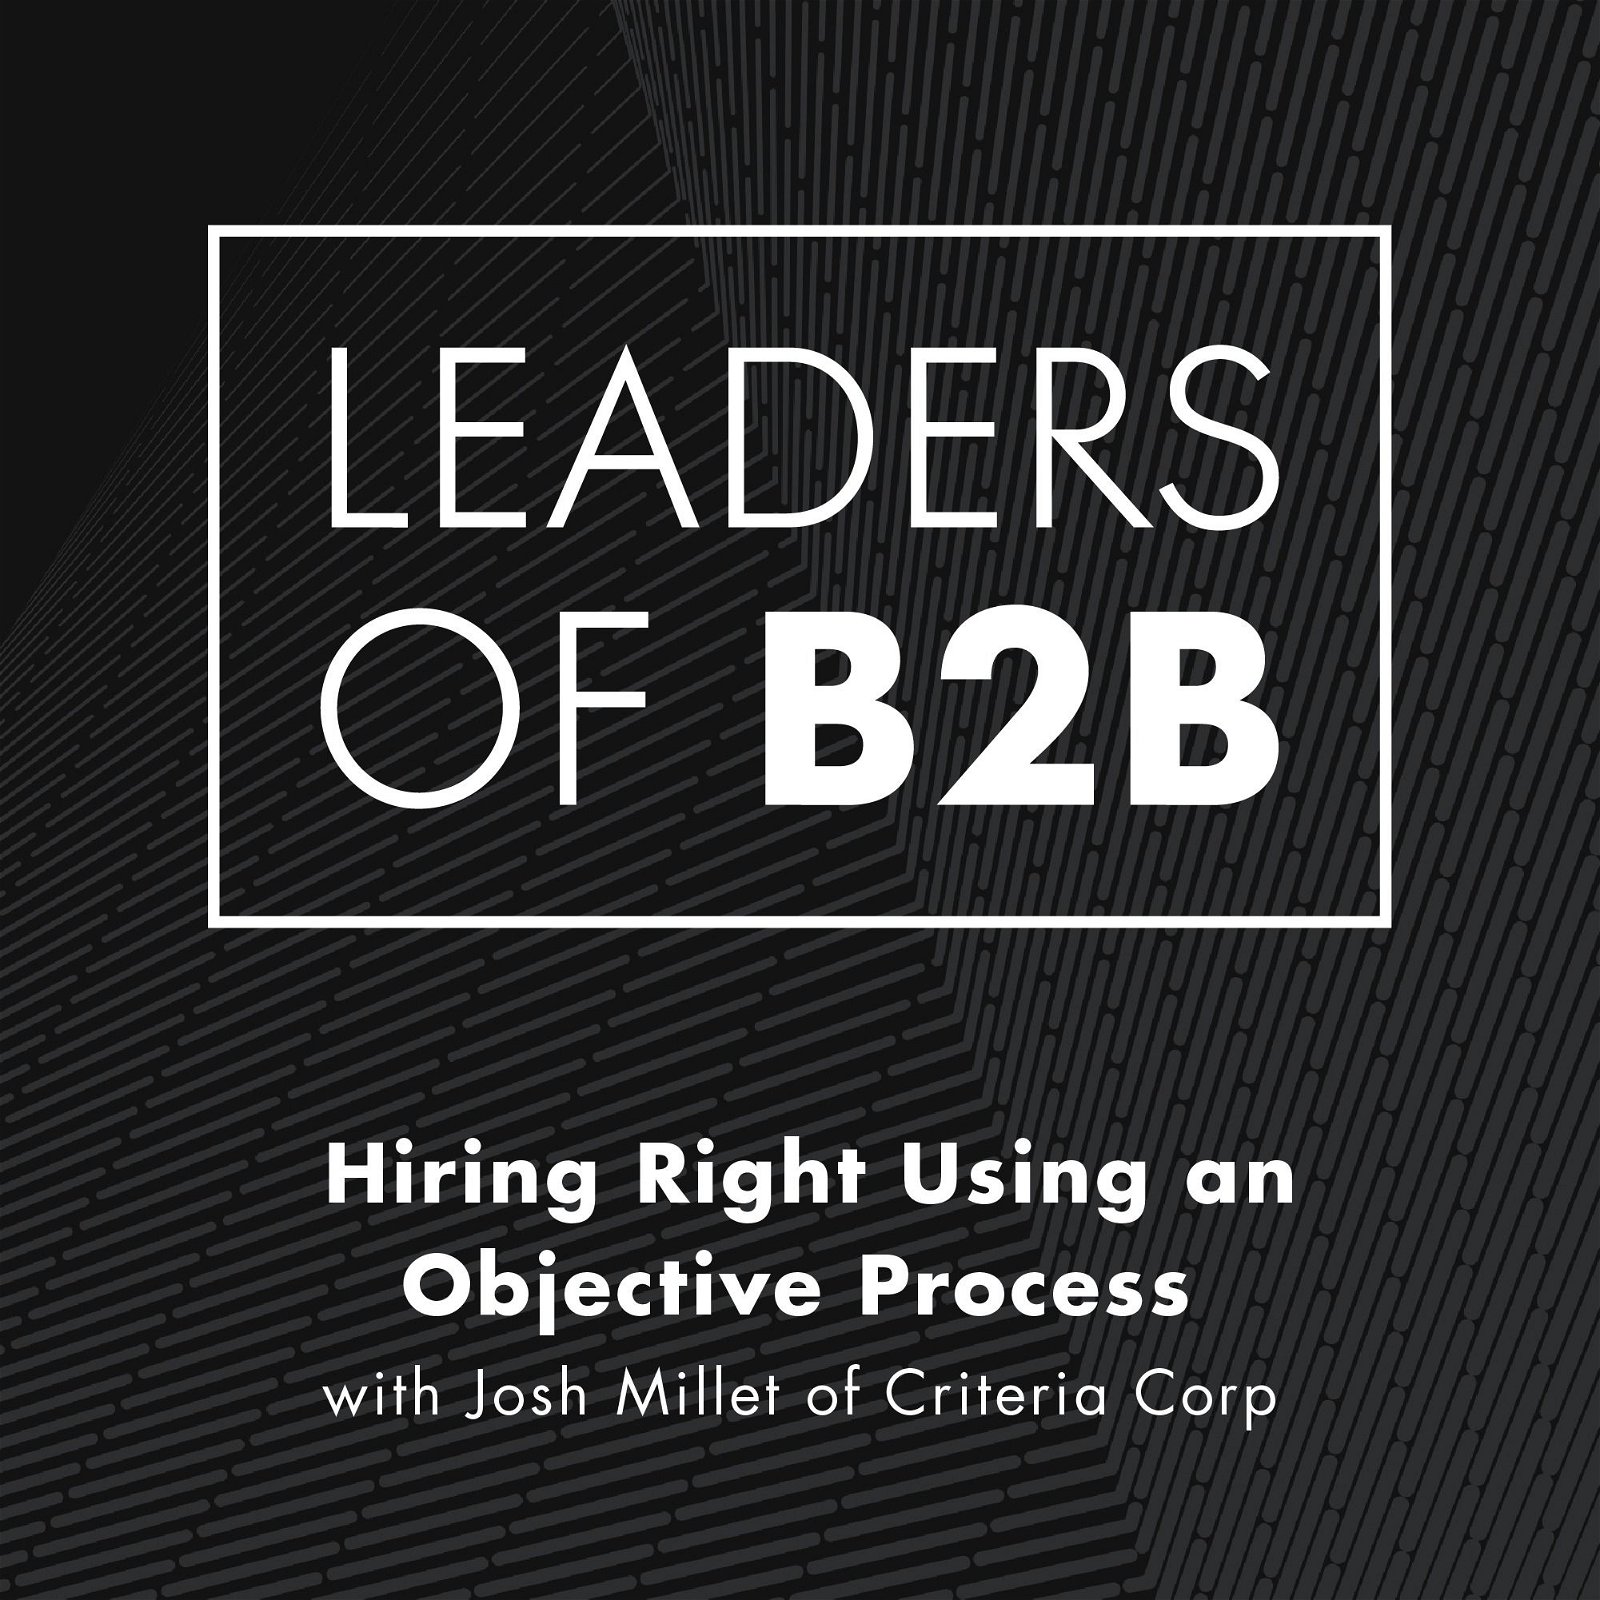 Hiring Right, Using an Objective Process with Josh Millet of Criteria Corp